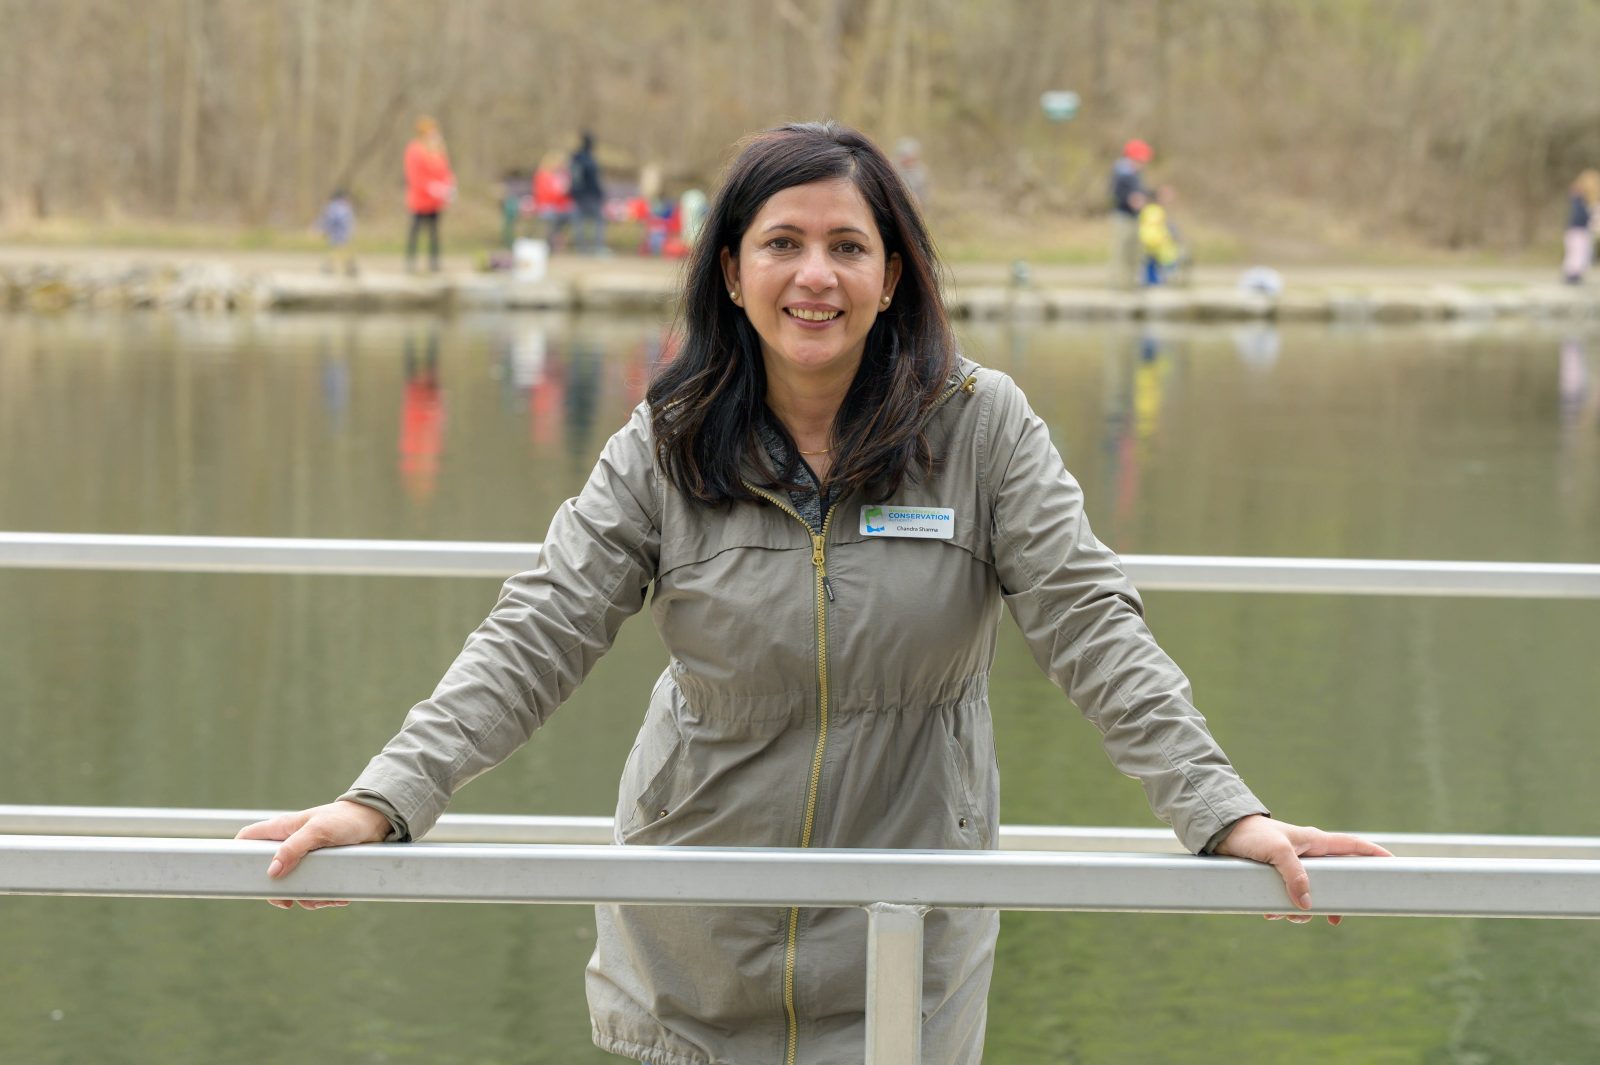 Chandra Sharma stands on a bridge with water and people in the background.